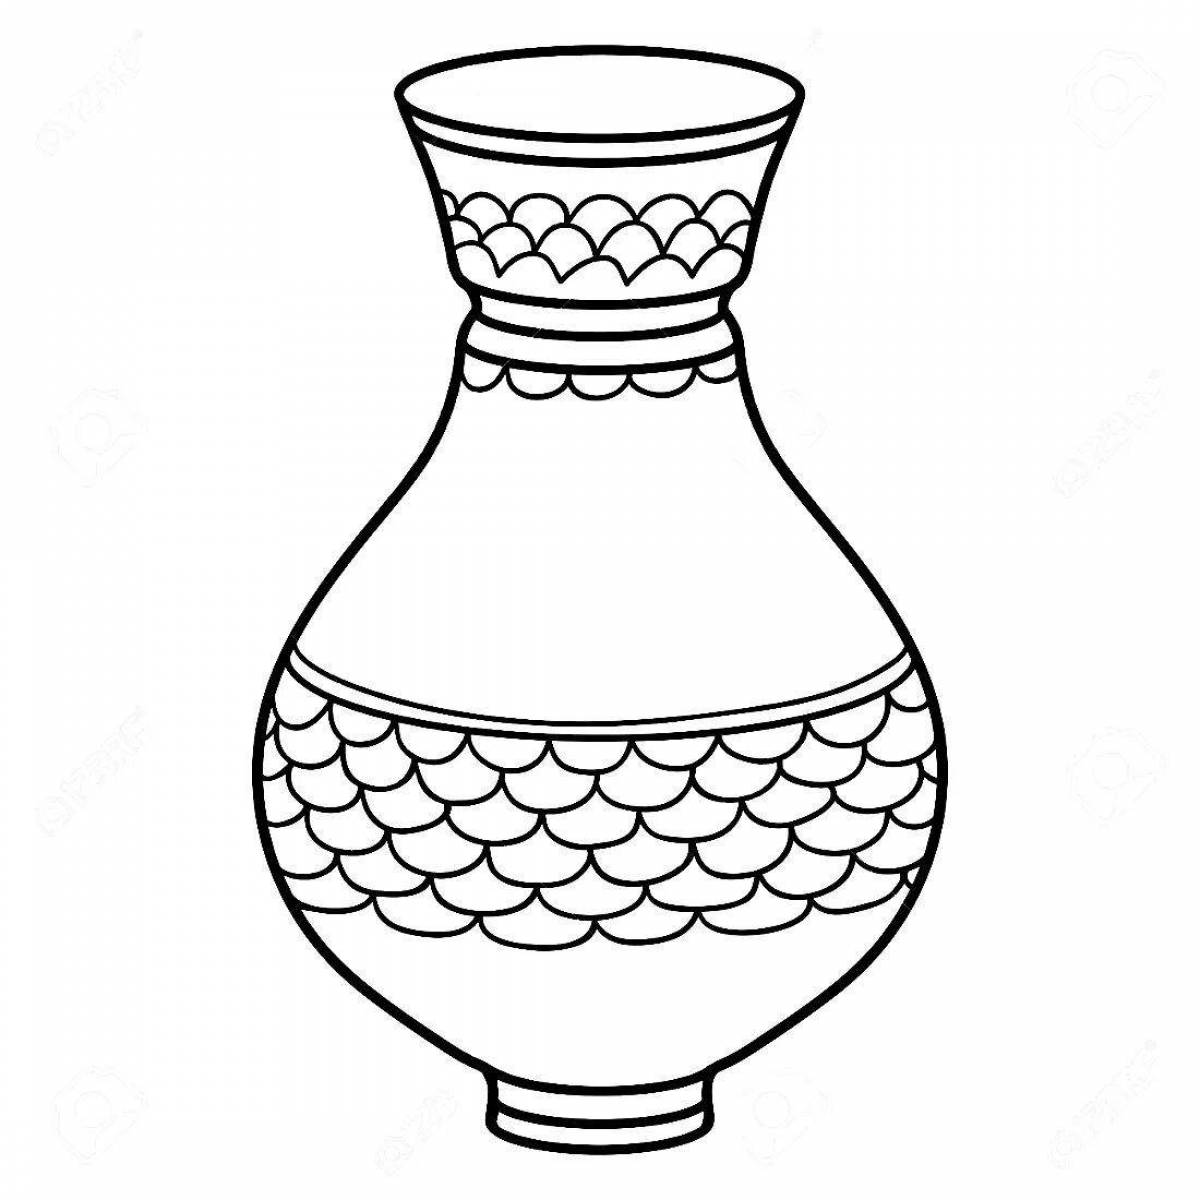 Exquisite vase coloring page